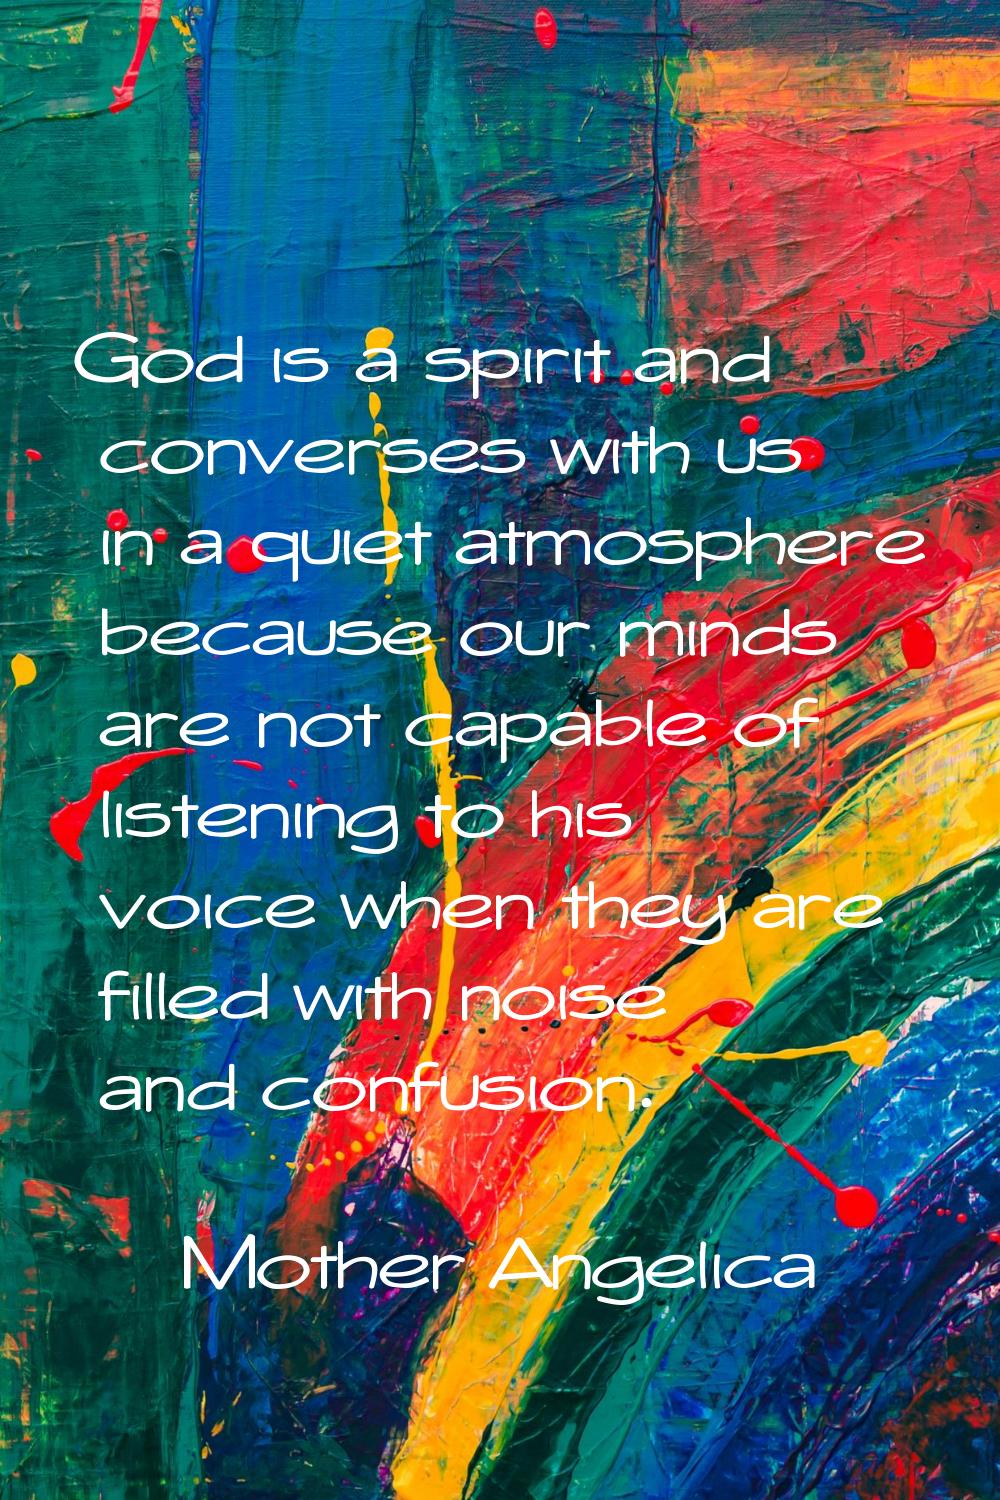 God is a spirit and converses with us in a quiet atmosphere because our minds are not capable of li